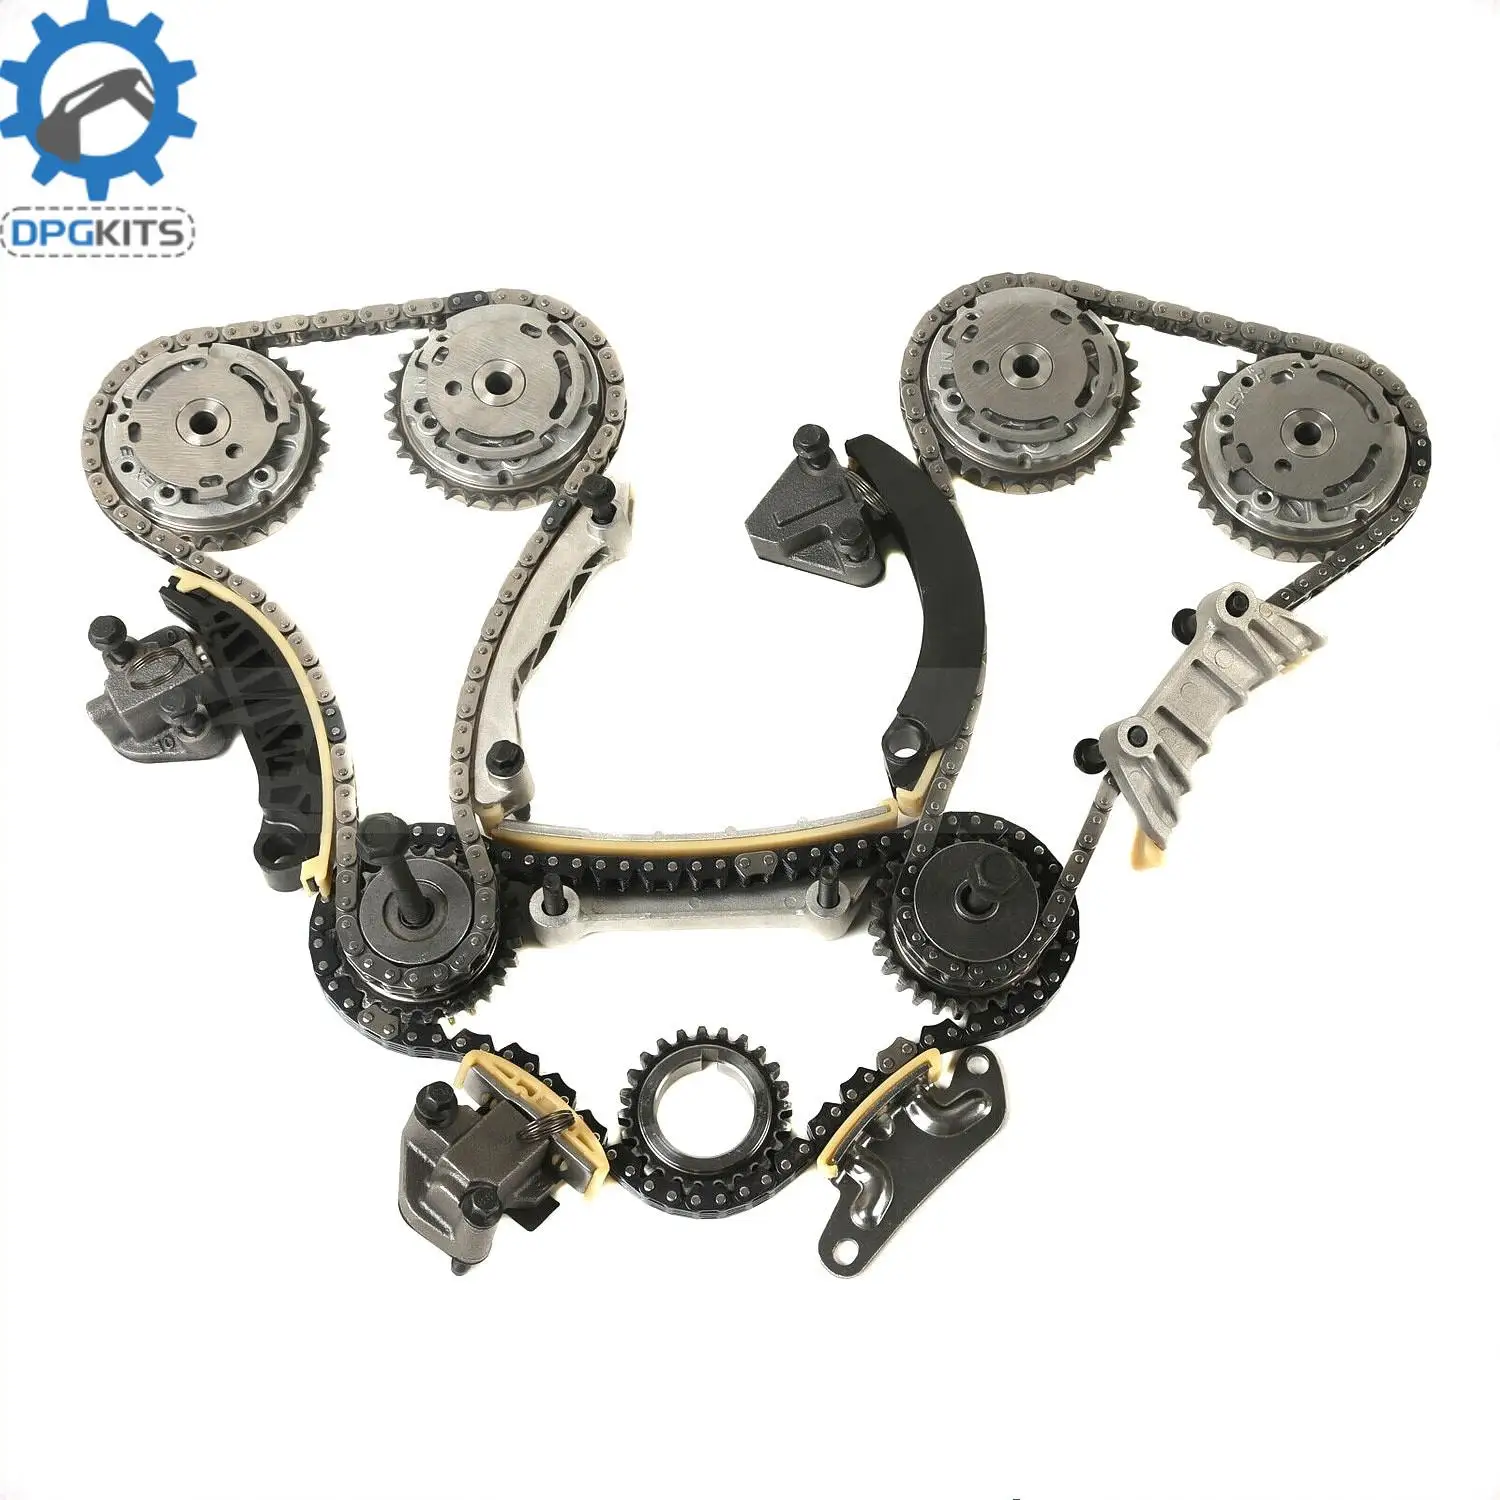 

1set 12588273 12588272 916-637 916-951 12571759 Timing Chain Kit For Buick Lacrosse Rendezvous Cadillac CTS SRX STS 2.8L 3.6L V6